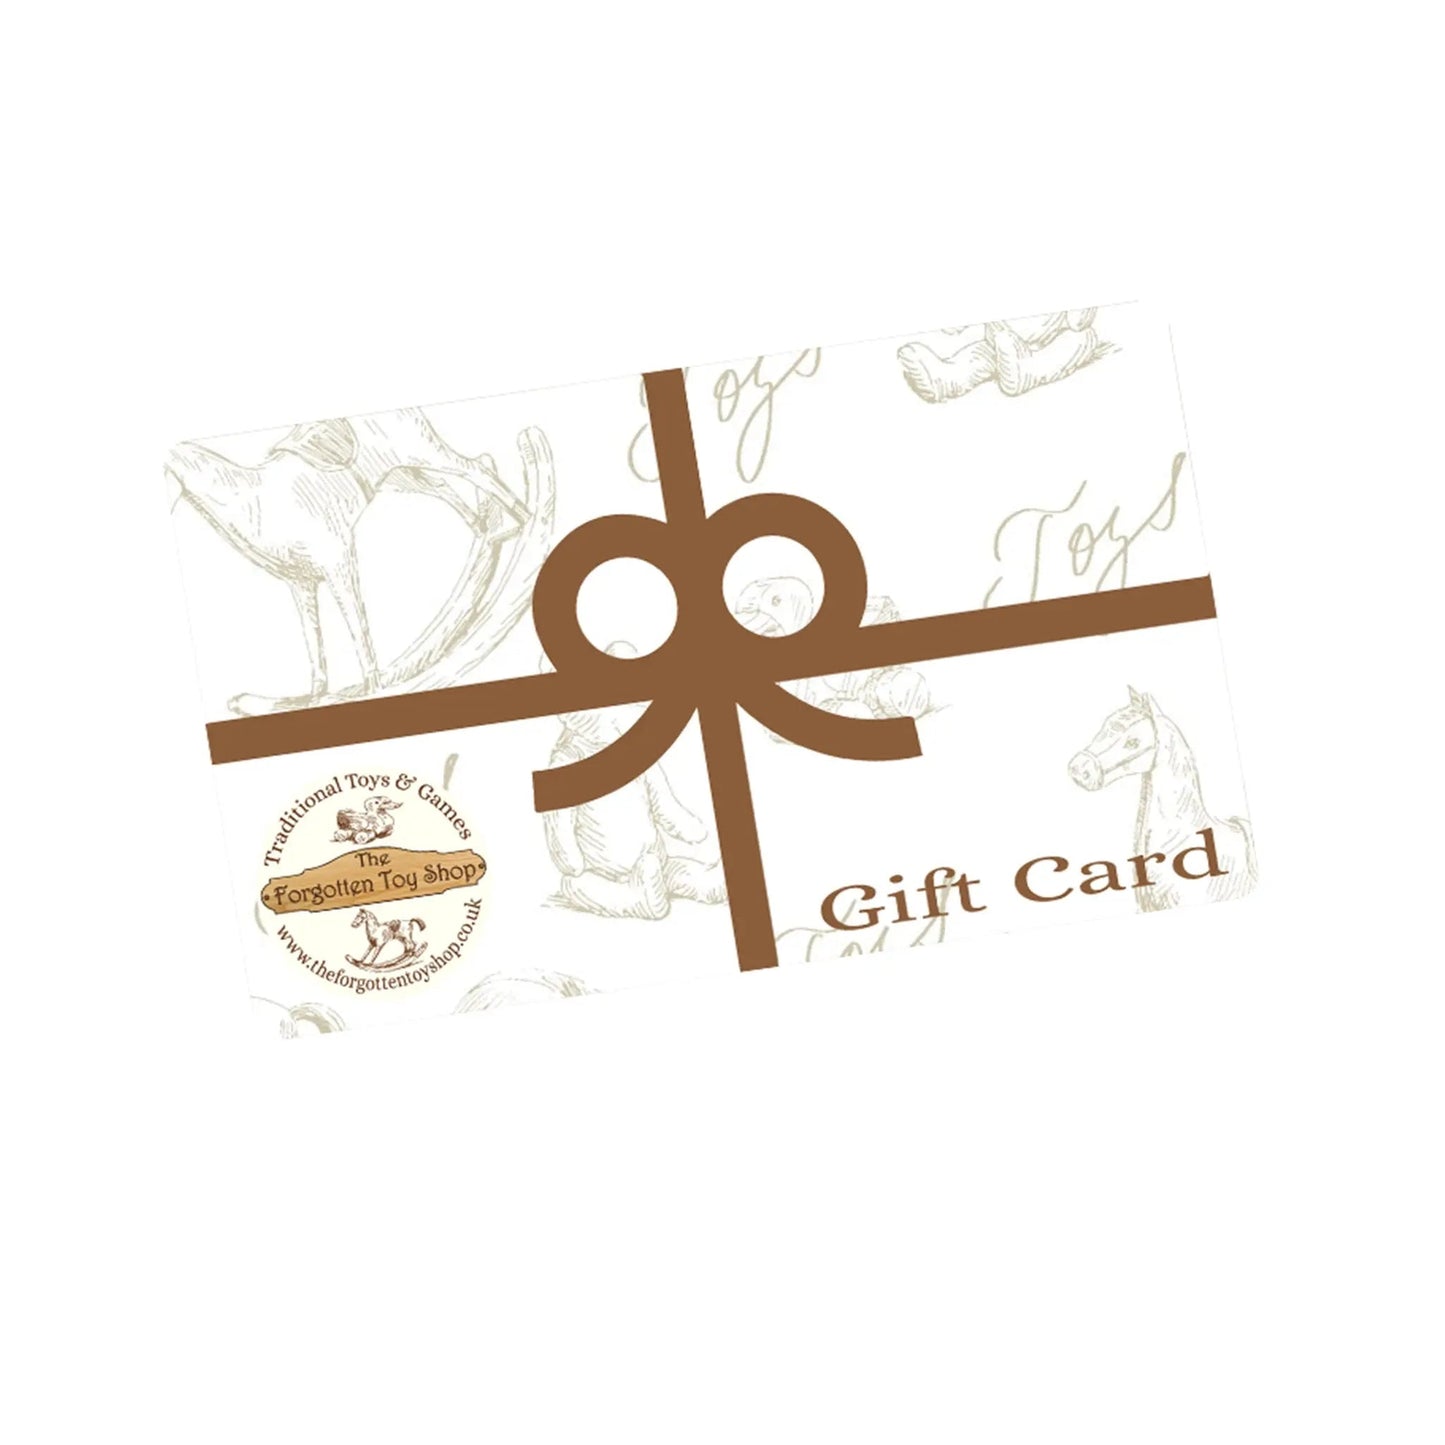 Gift Card - The Forgotten Toy Shop - The Forgotten Toy Shop